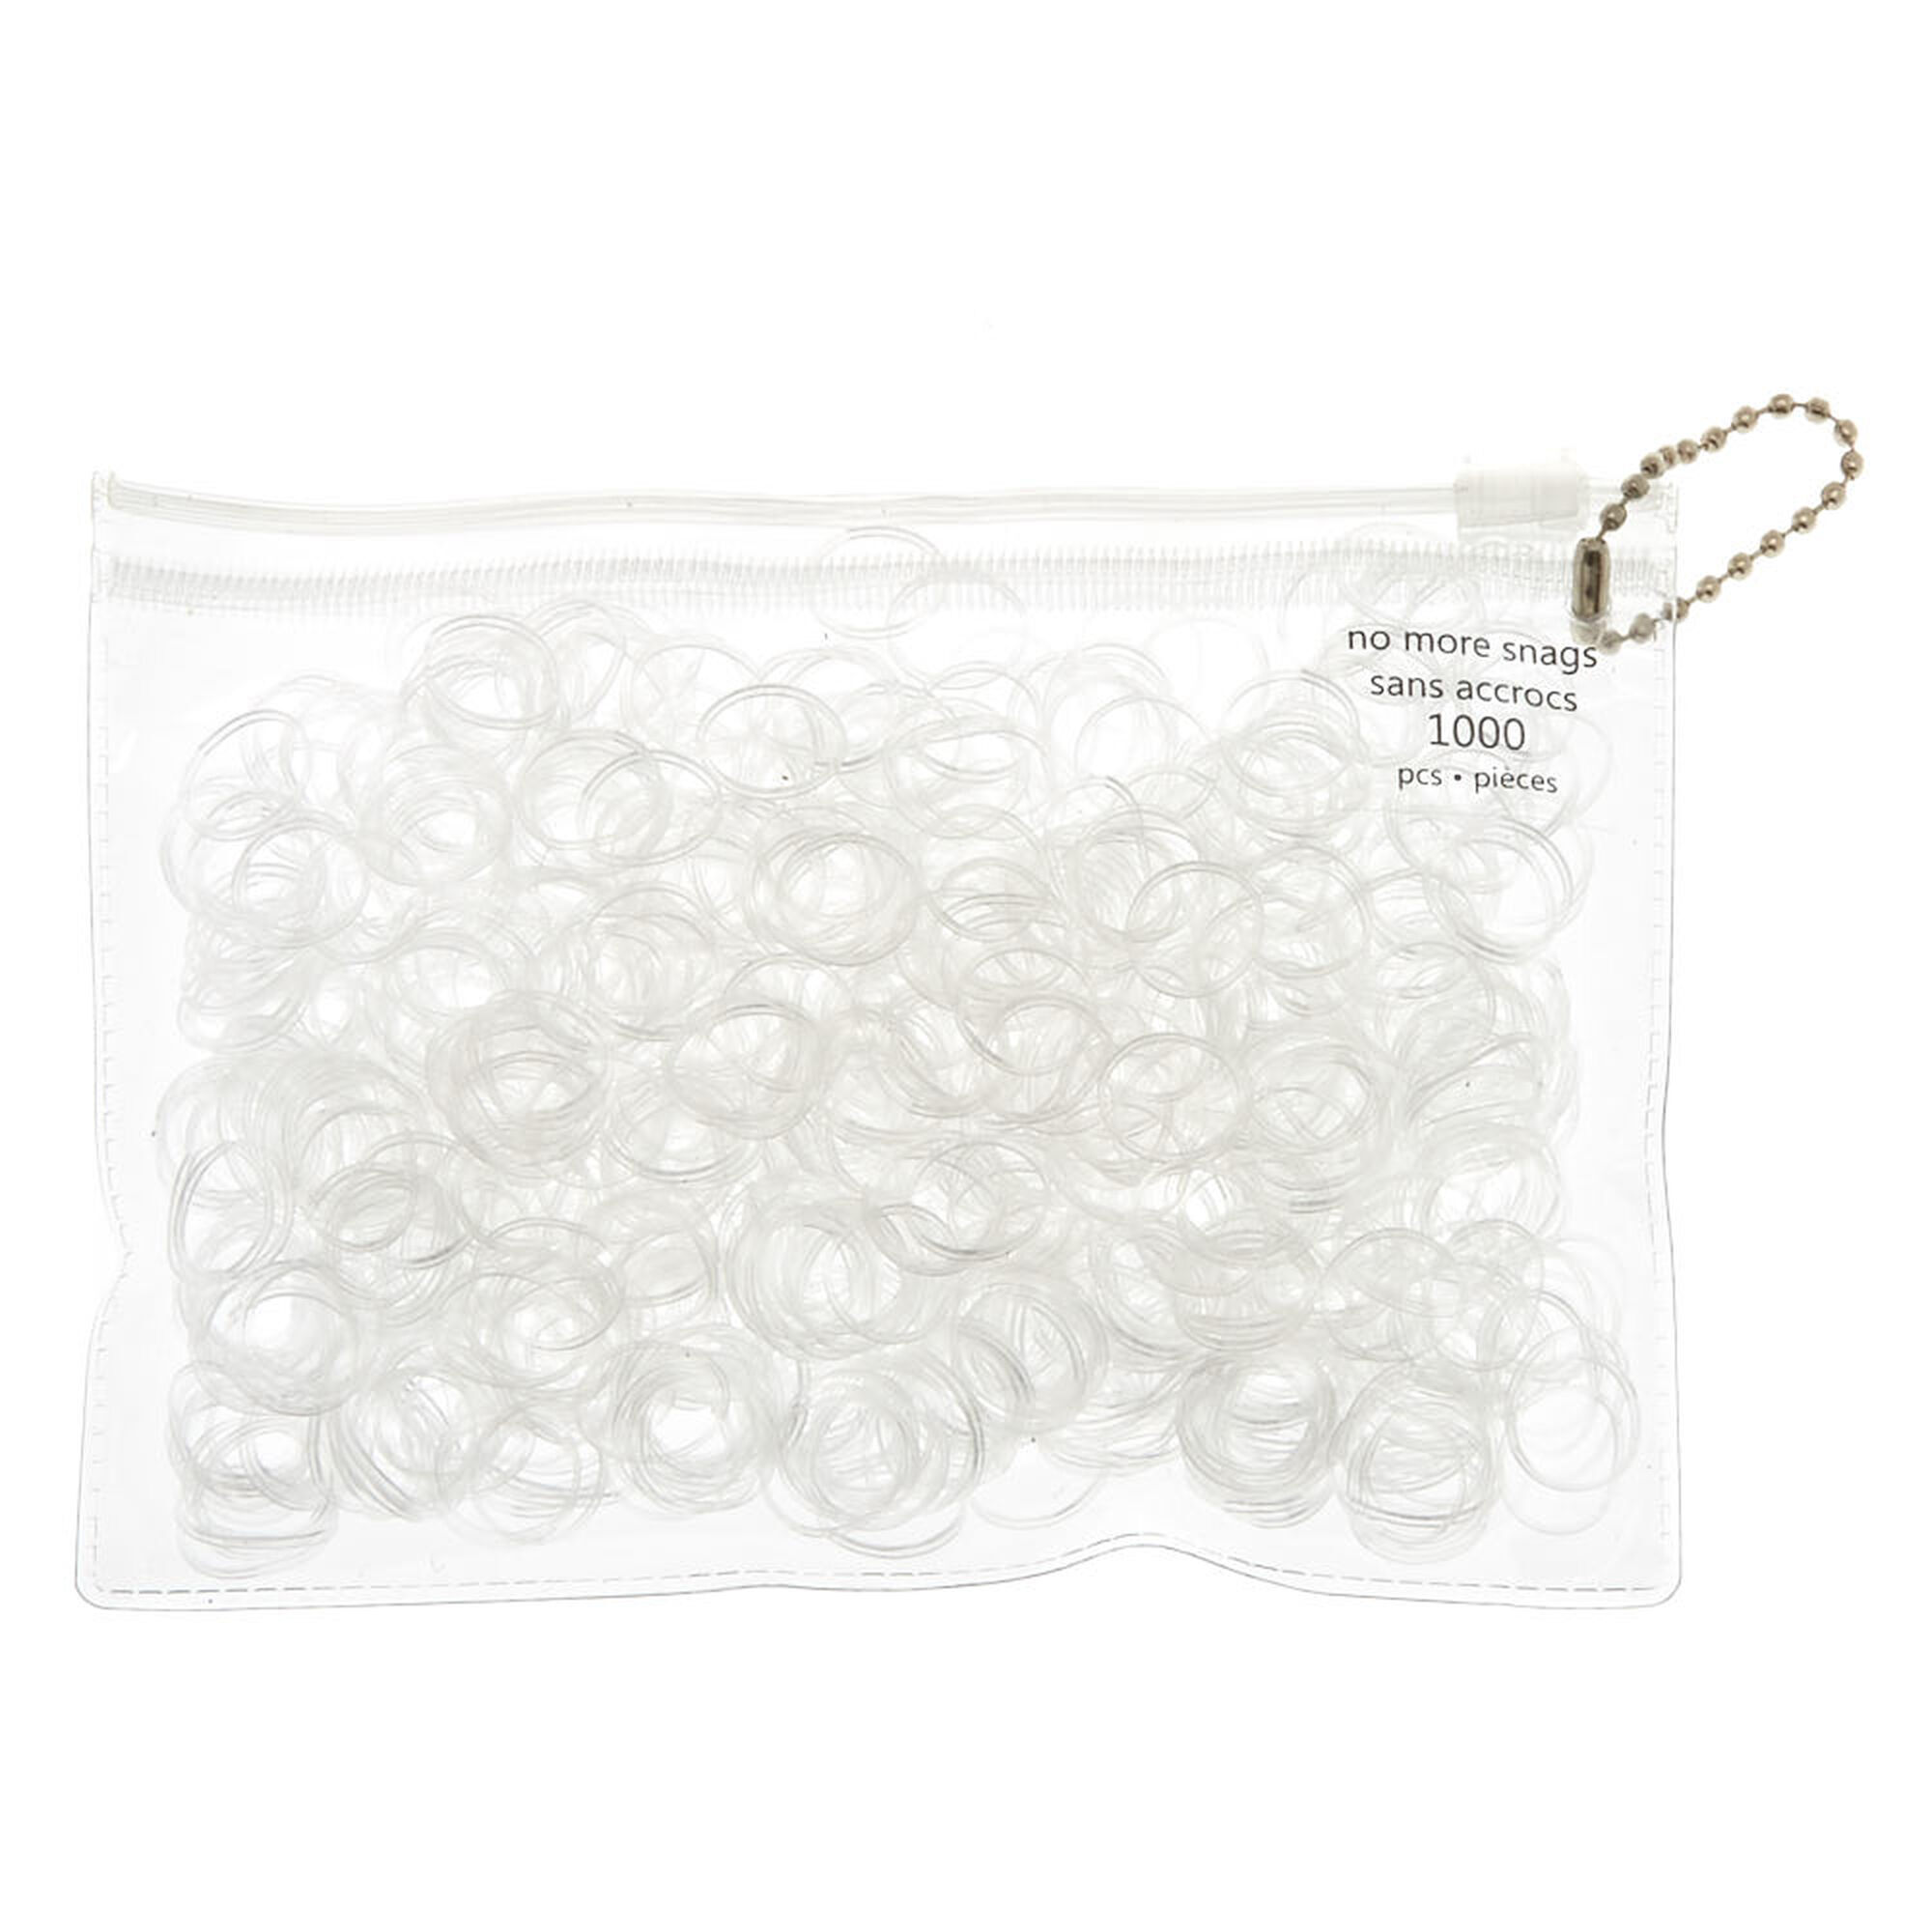 View Claires Clear No More Snag Mini Hair Ties 1000 Pack information